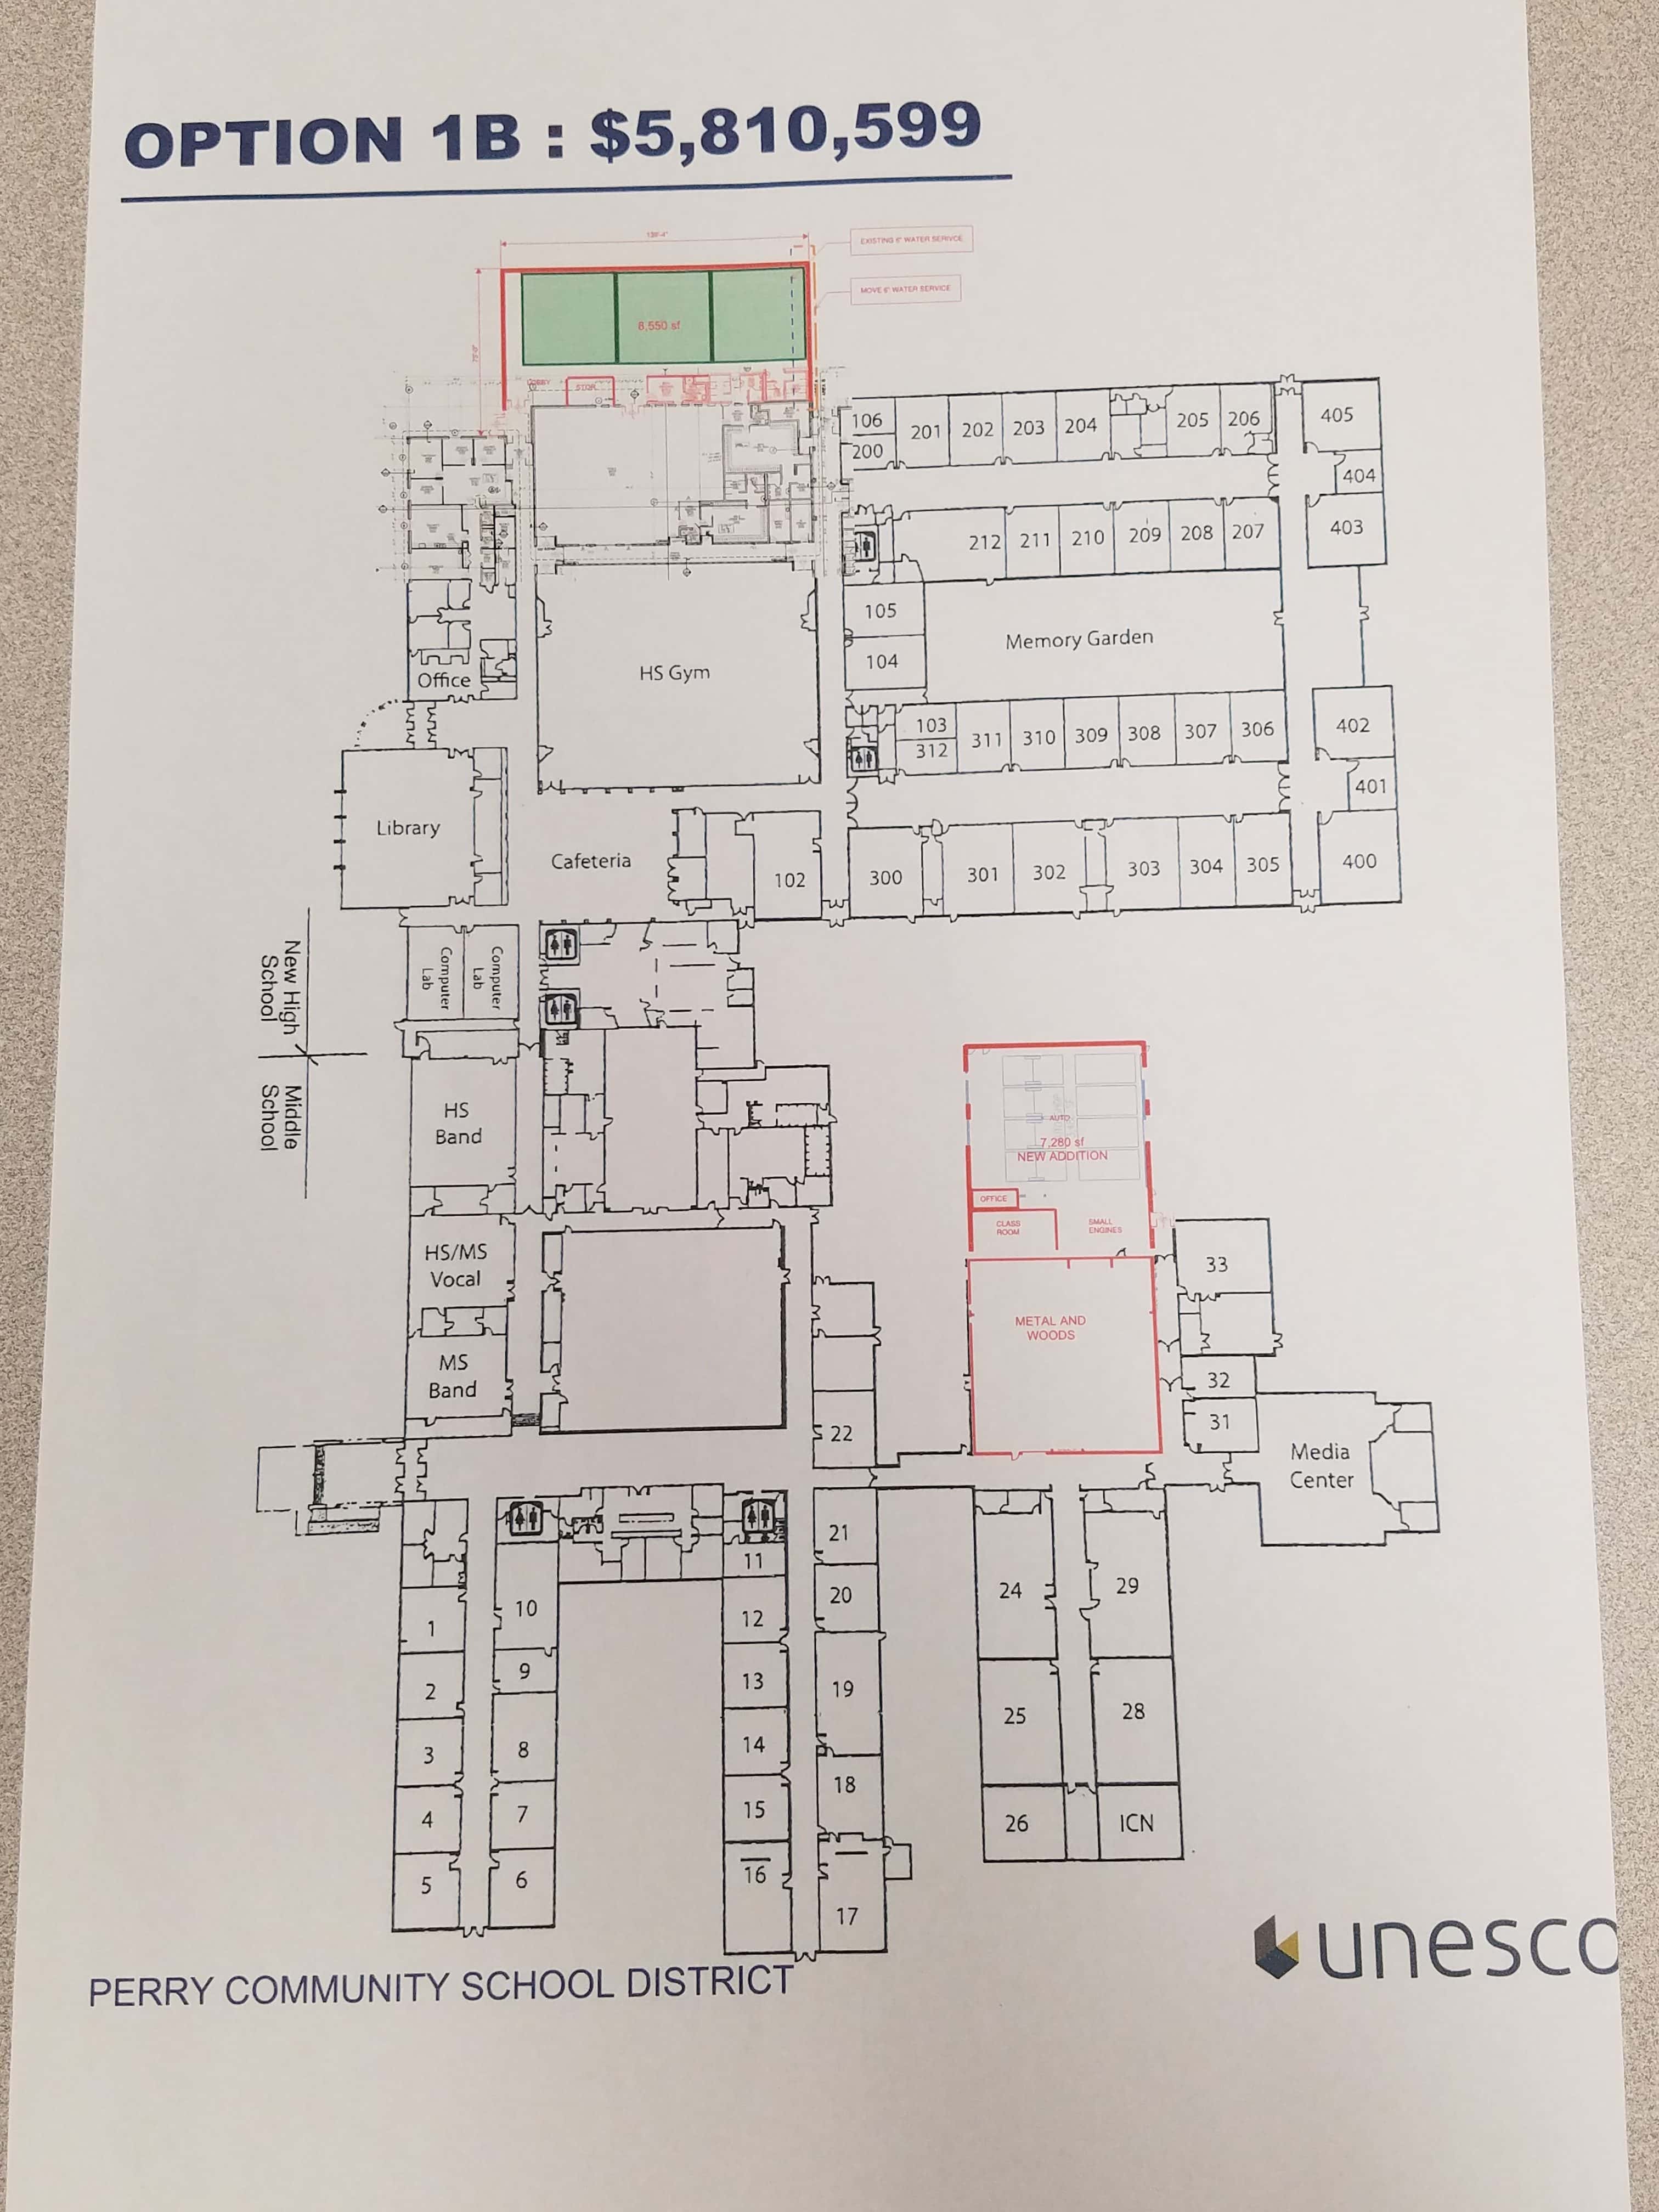 Perry School Board Approves 5.8 Million Floorplan for